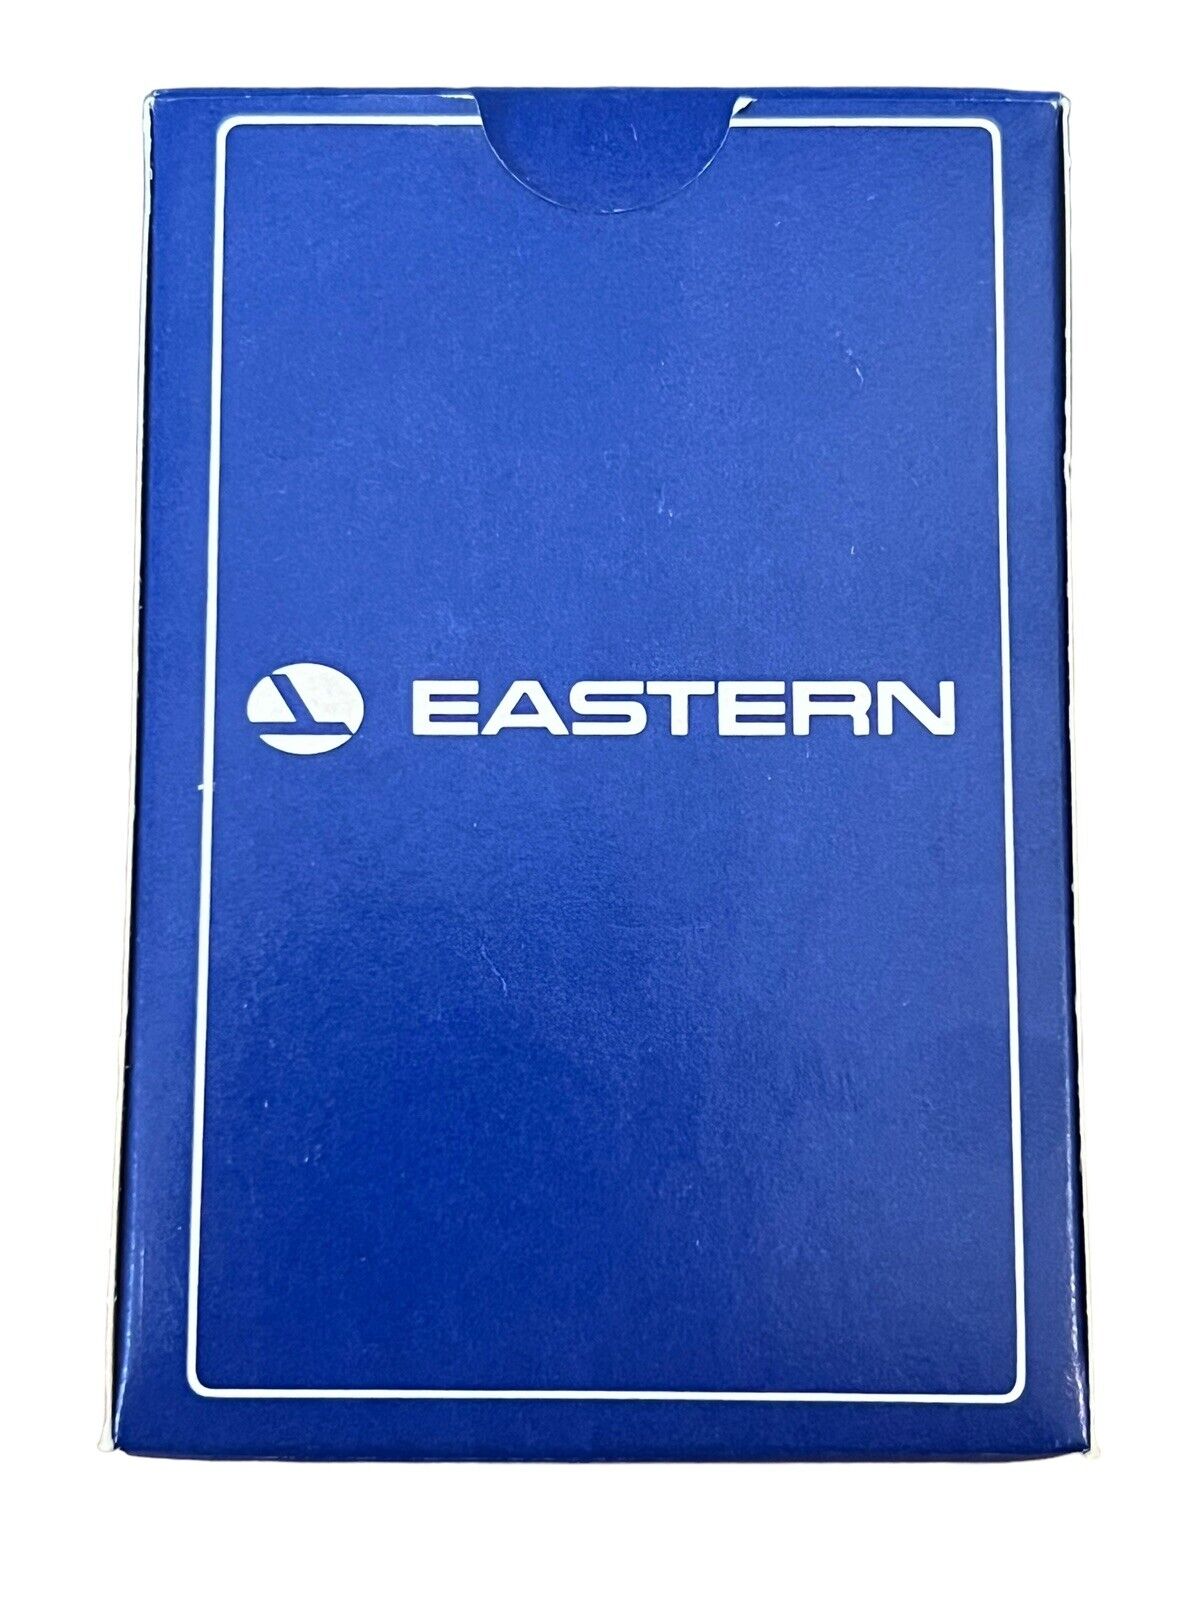 NOS Vintage Eastern Airlines Bridge Size Playing Cards SEALED INSIDE BOX 